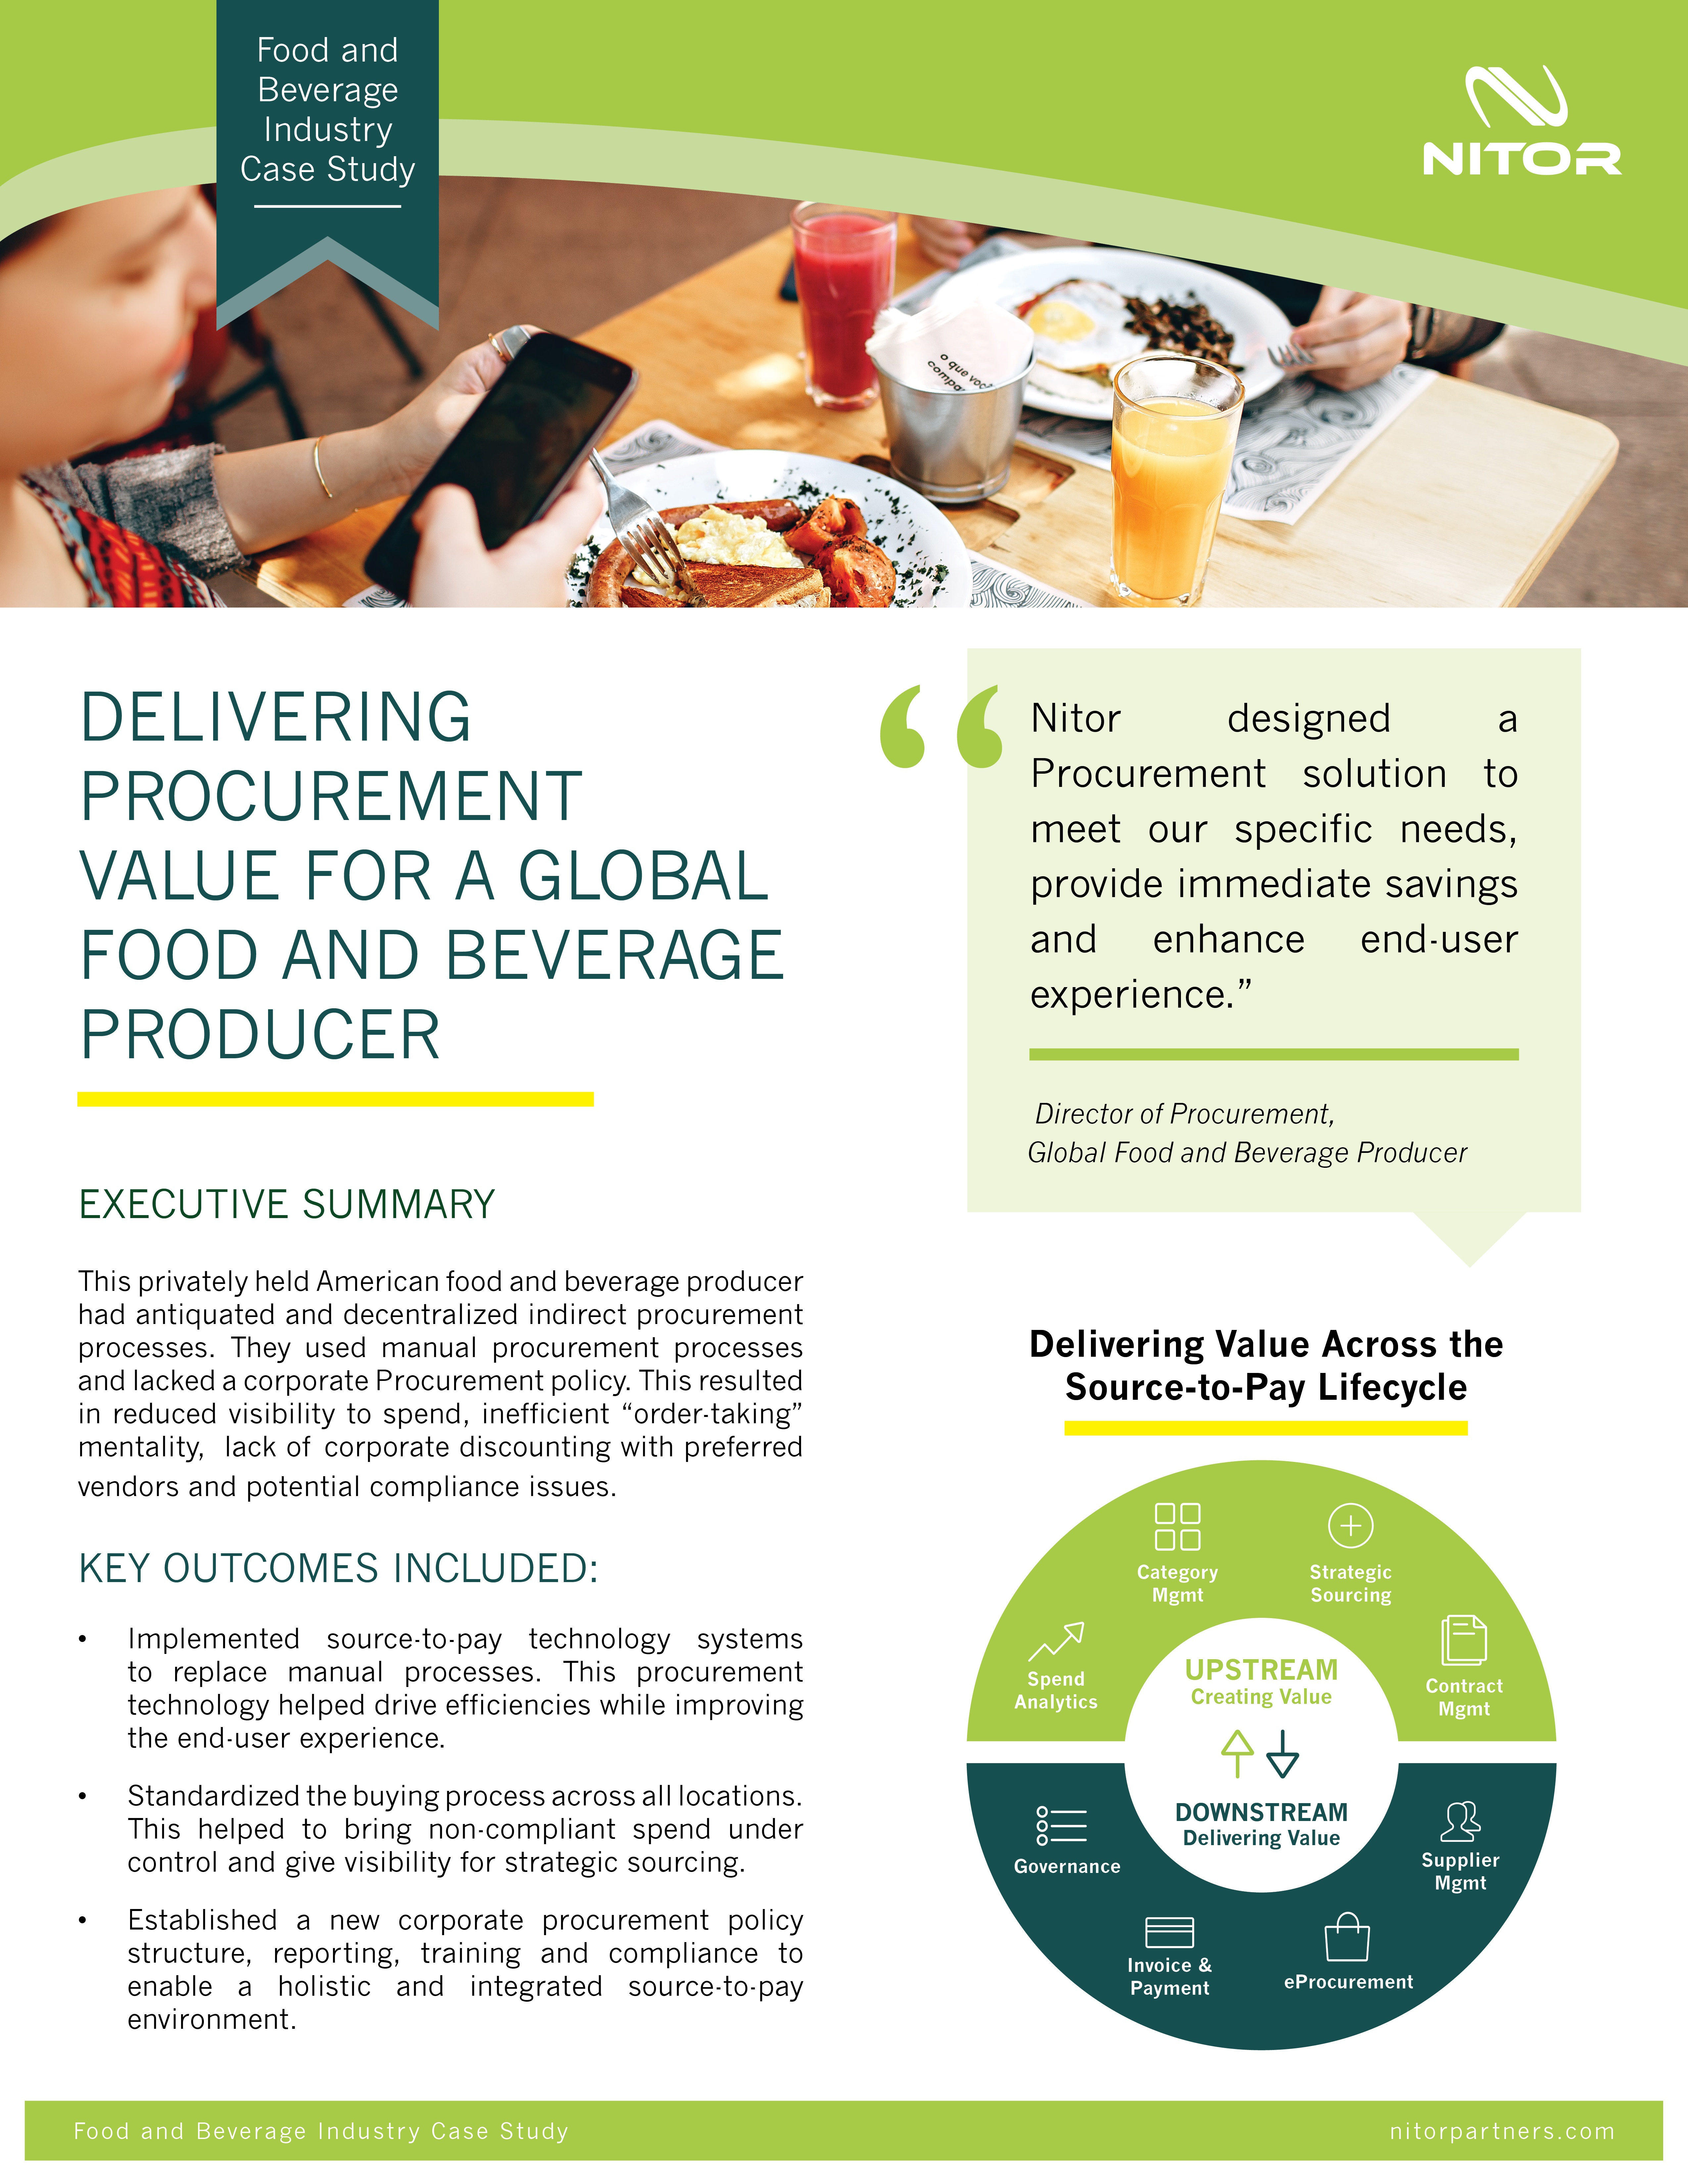 Food and Beverage Producer